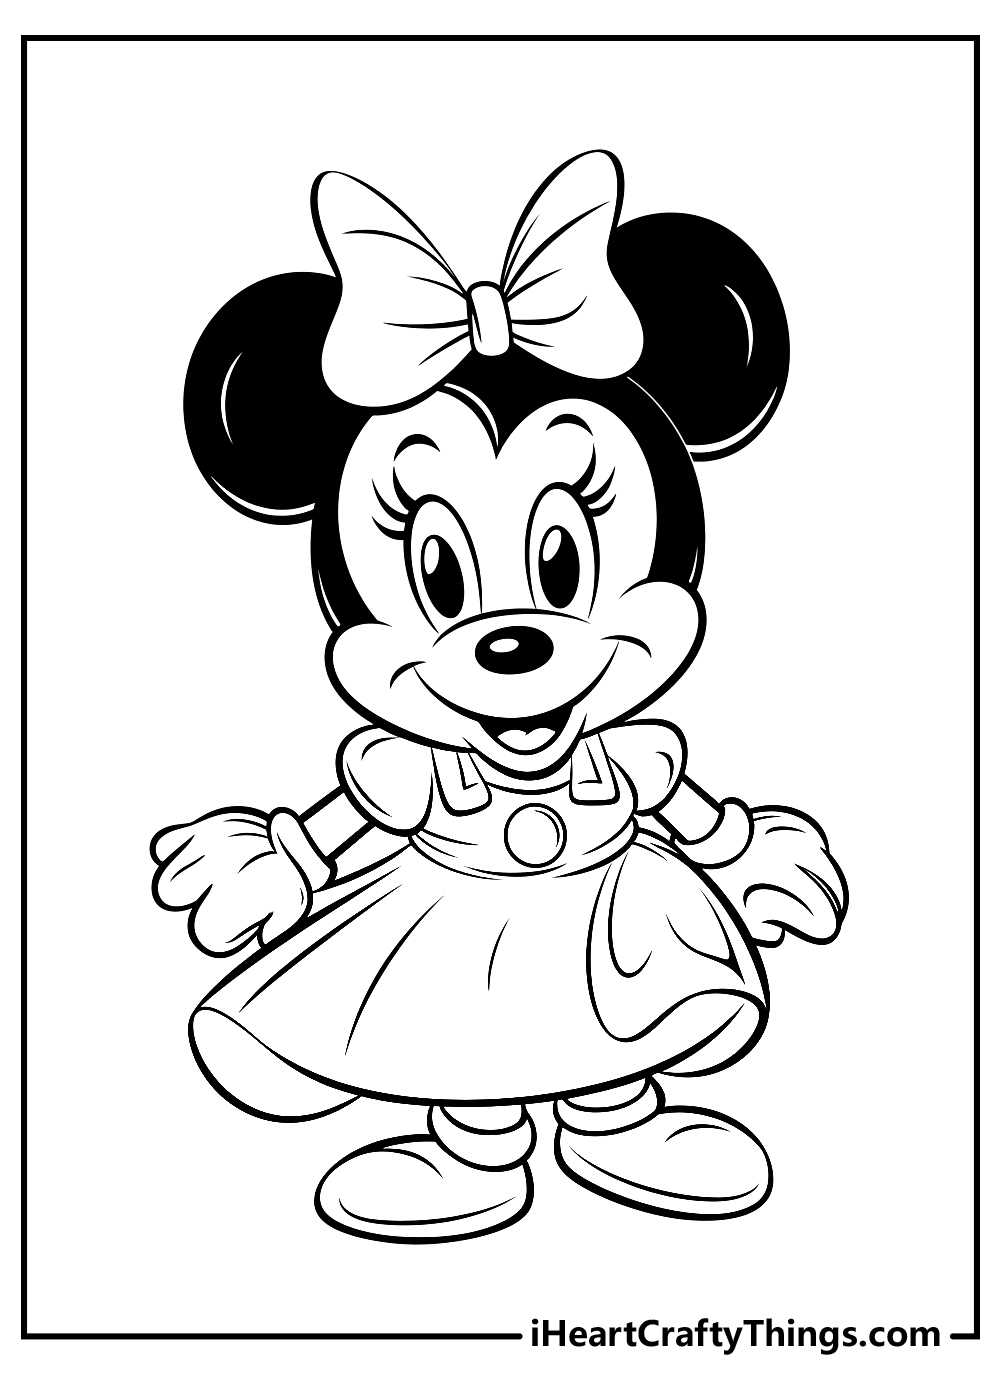 original Minnie mouse coloring pages